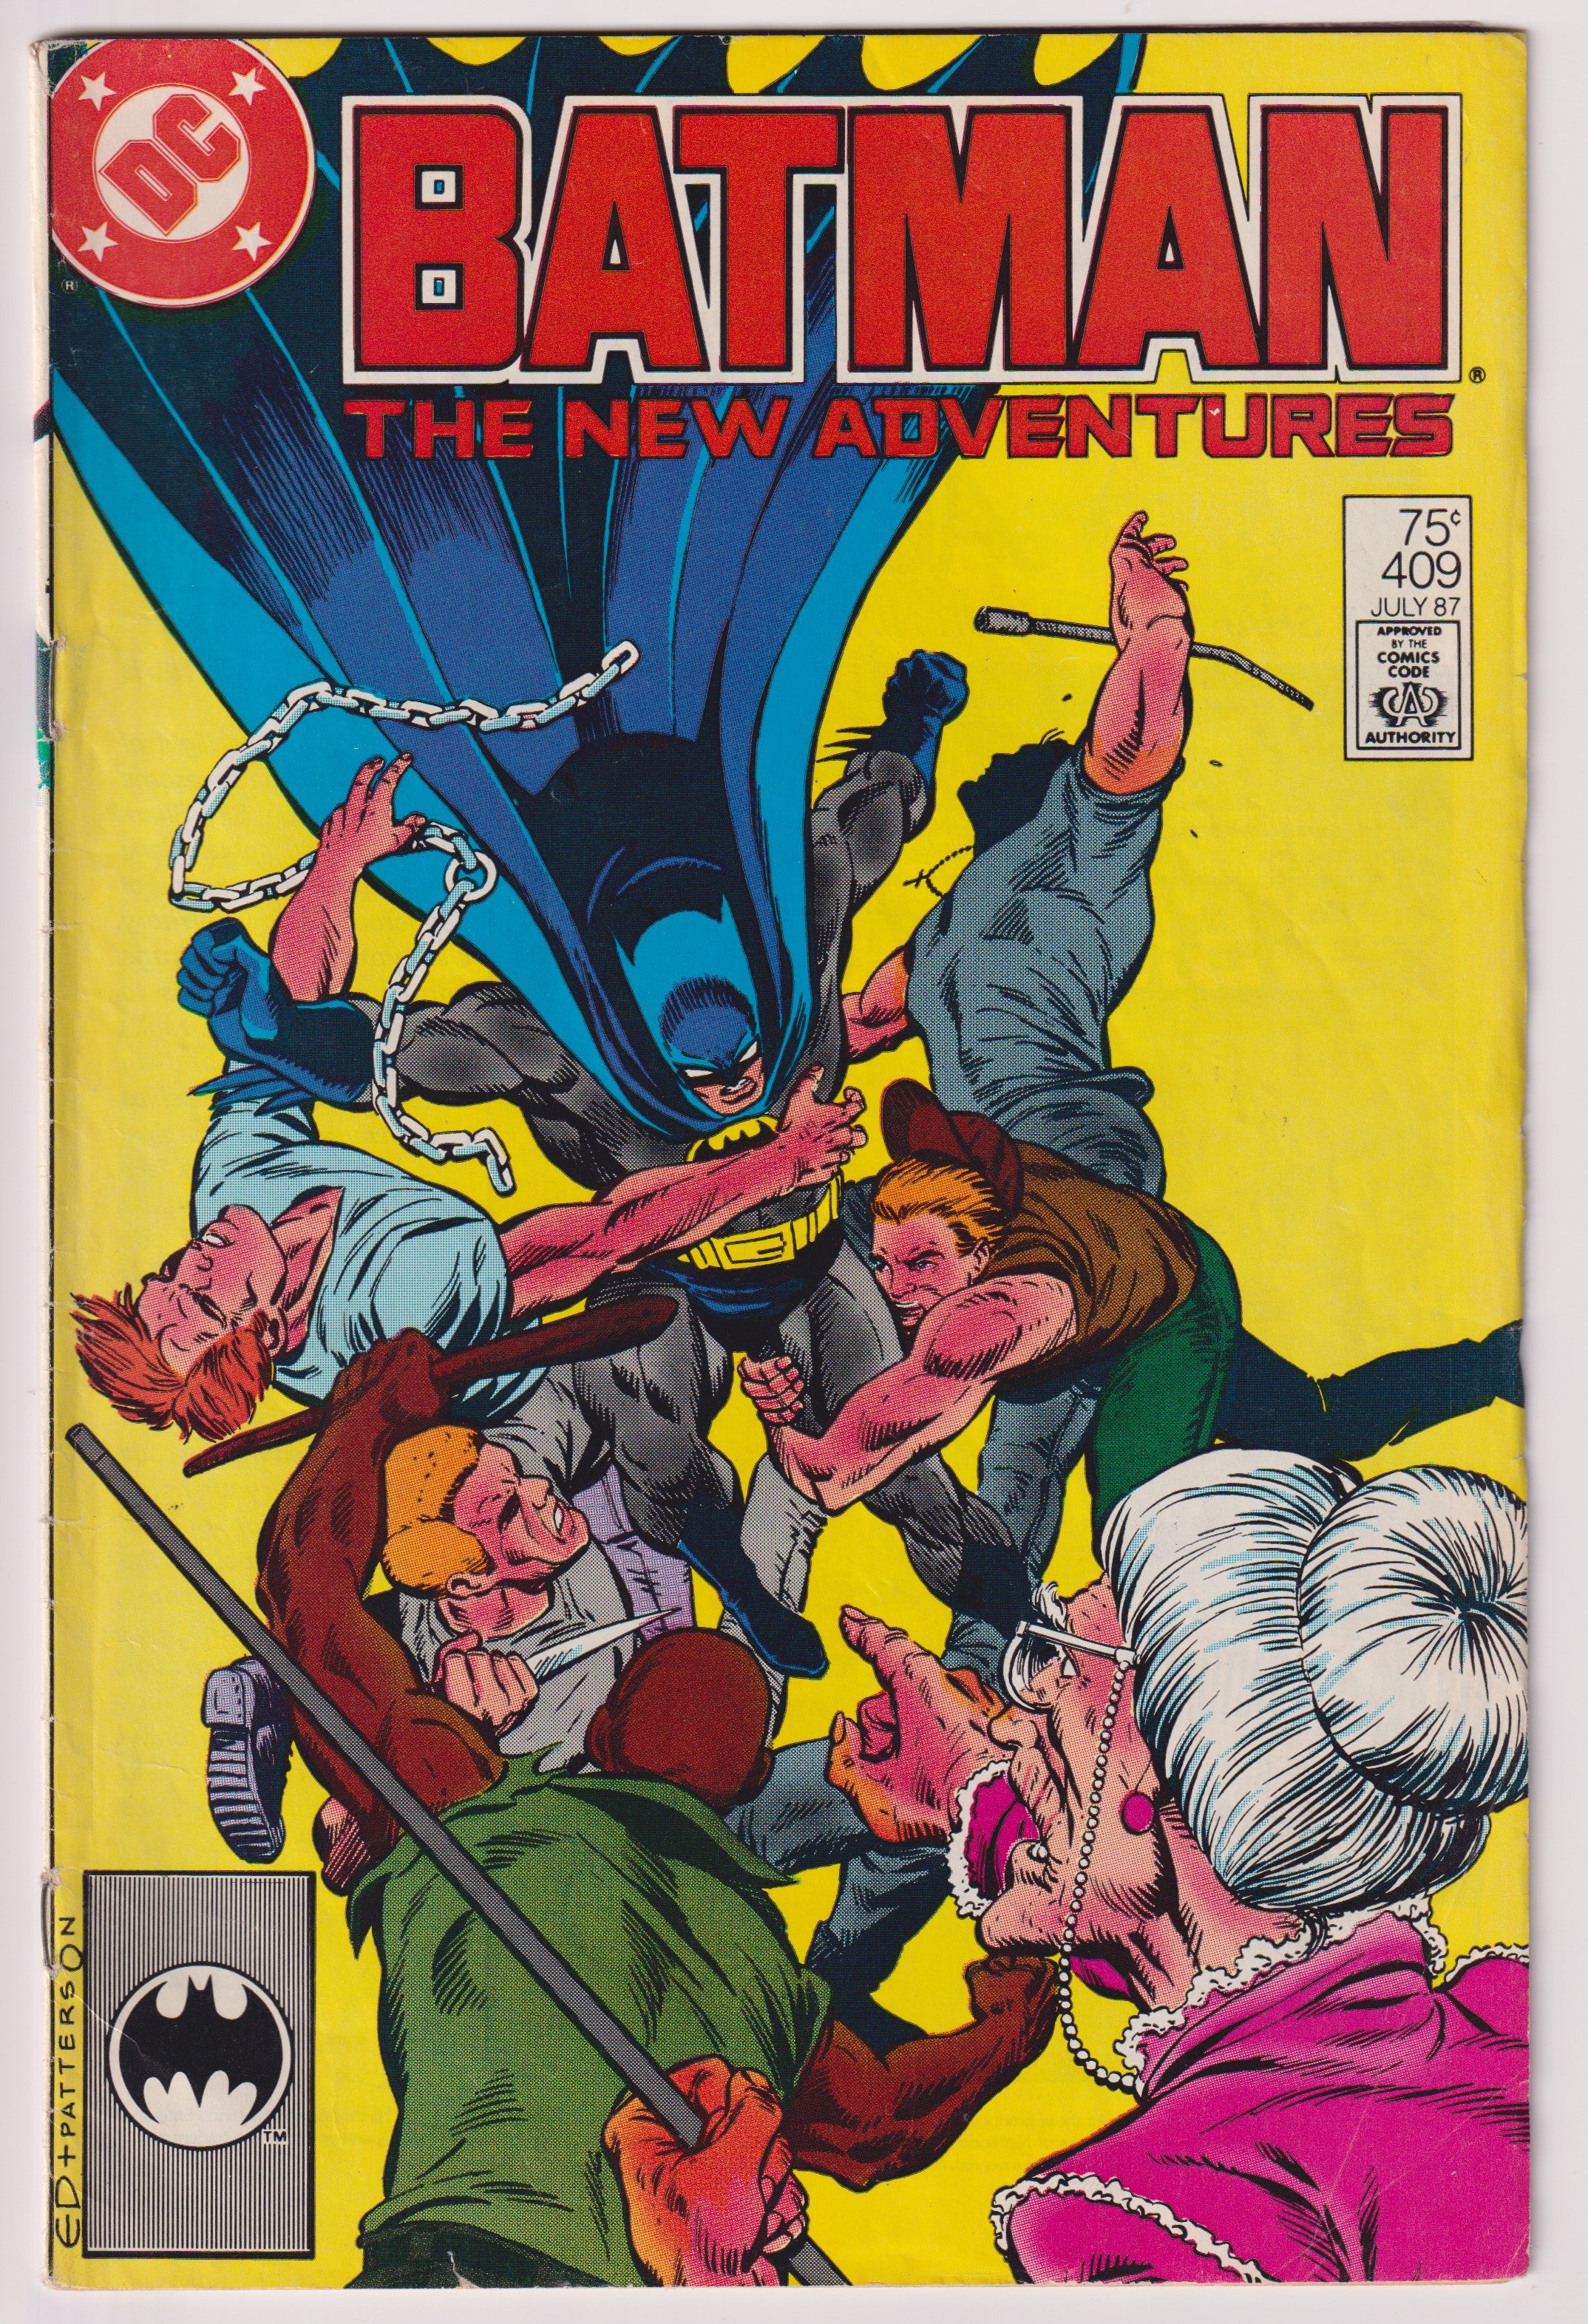 Photo of Batman, Vol. 1 (1987)  Iss 409A Fine  Comic sold by Stronghold Collectibles